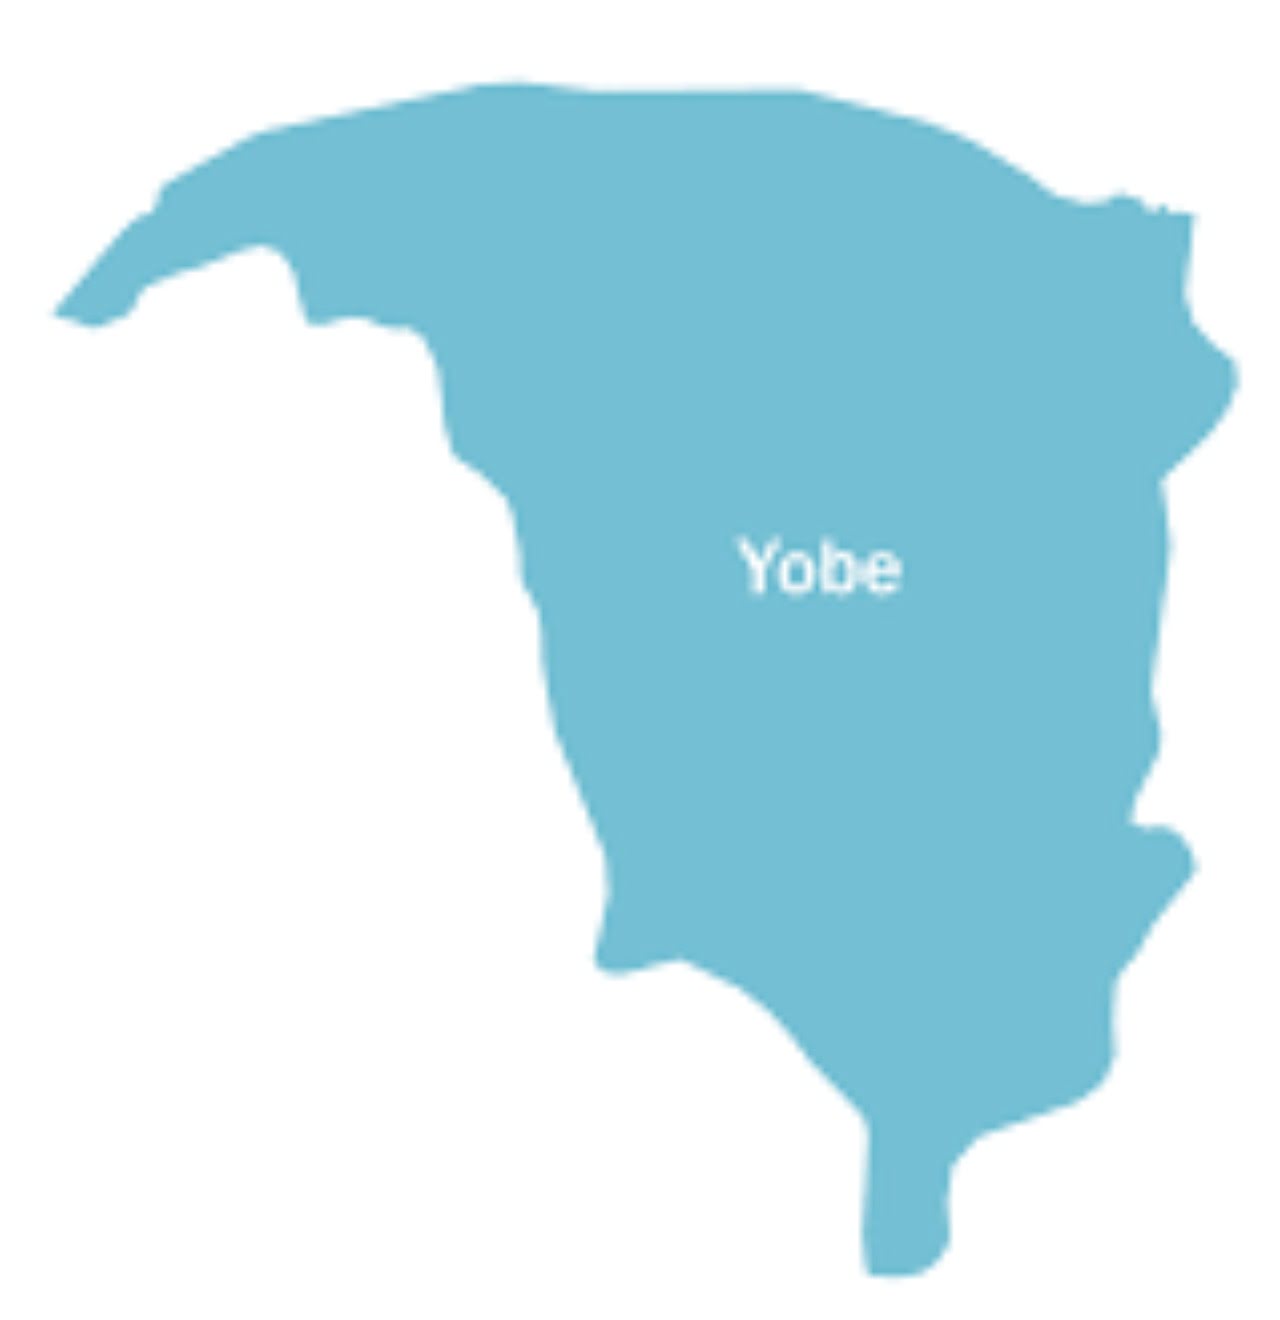 Nigeria news : COVID-19: Yobe govt orders reopening of state owned tertiary institutions